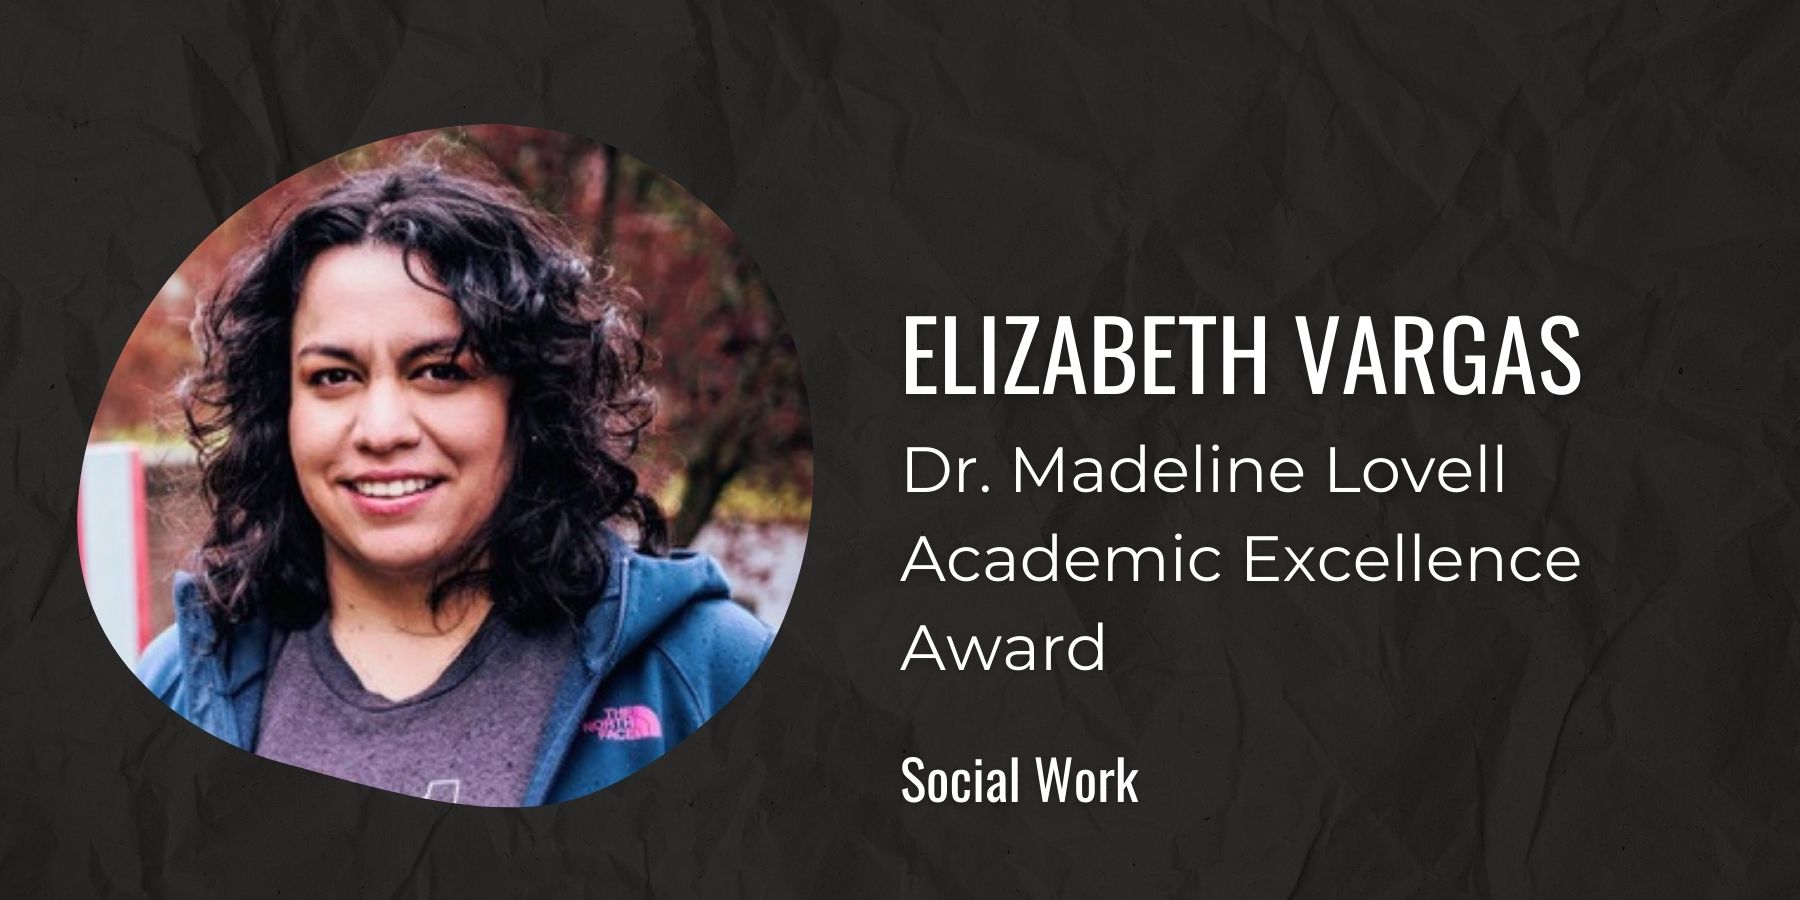 Image of Elizabeth Vargas with text: Dr. Madeline Lovell Academic Excellence Award, Social Work
